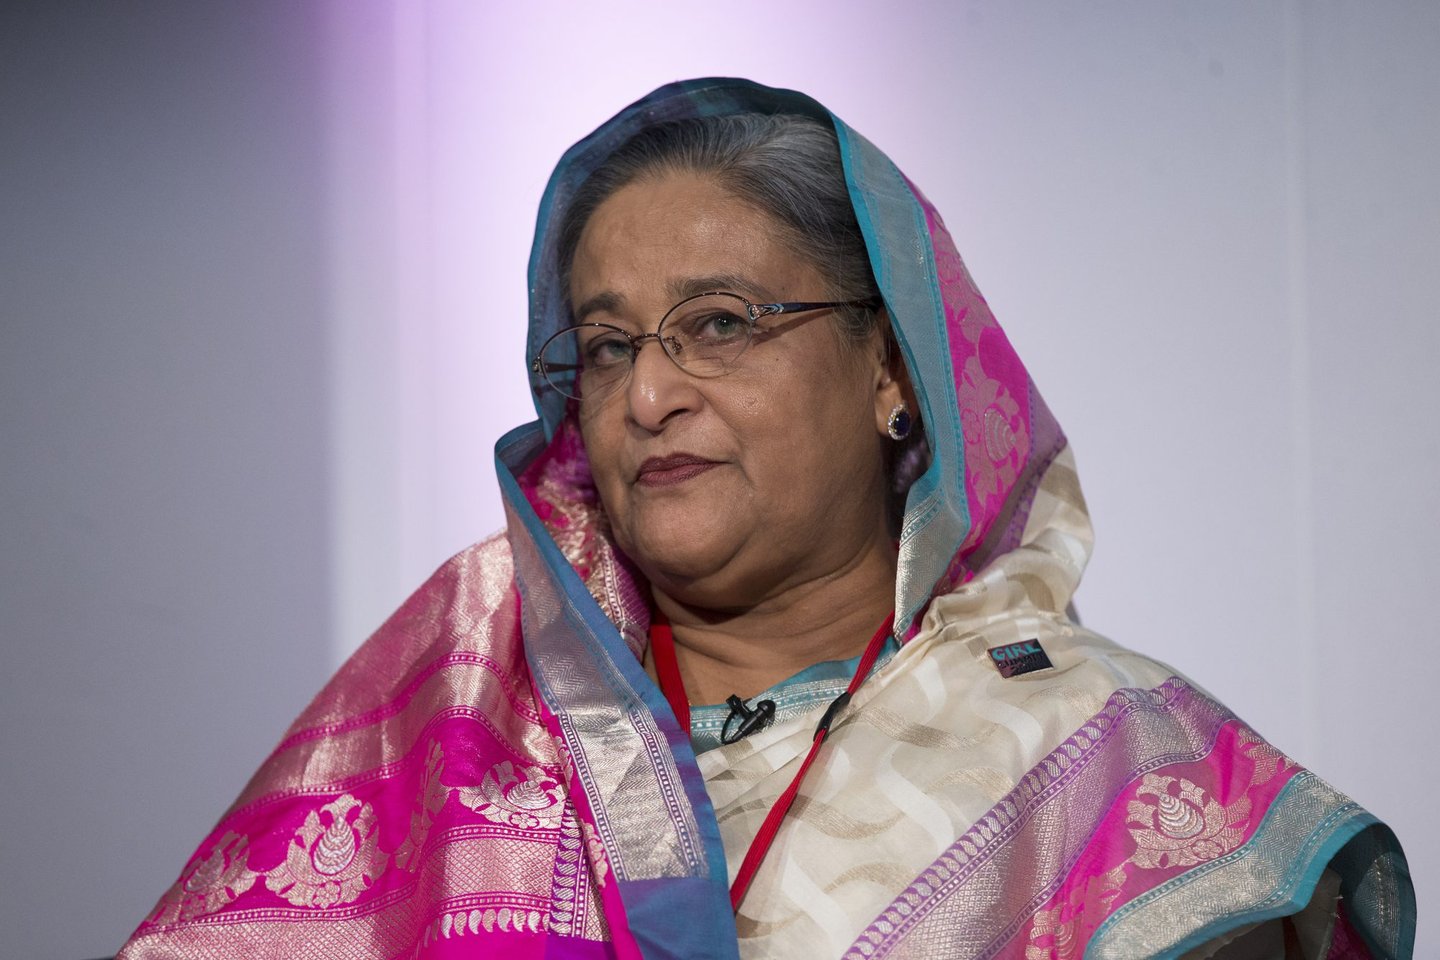 LONDON, ENGLAND - JULY 22: Sheikh Hasina, the Prime Minister of Bangladesh, speaks at the 'Girl Summit 2014' in Walworth Academy on July 22, 2014 in London, England. At the one-day summit the government has announced that parents will face prosecution if they fail to prevent their daughters suffering female genital mutilation (FGM). (Photo by Oli Scarff/Getty Images)